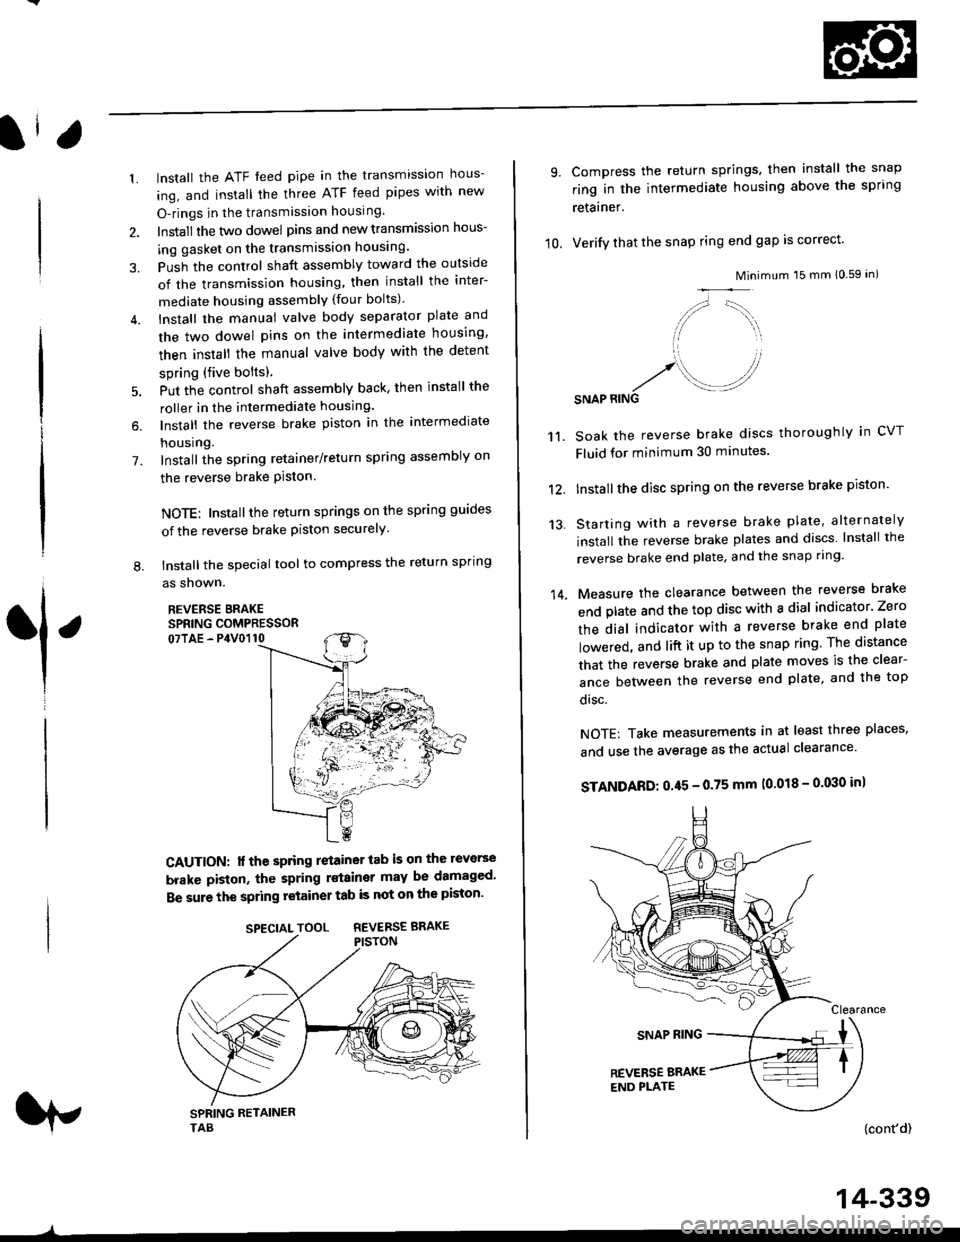 HONDA CIVIC 1996 6.G Workshop Manual 1.
7.
lnstall the ATF feed pipe in the transmission hous-
ing, and install the three ATF feed pipes with new
O-rings in the transmission housing,
Install the two dowel pins and new transmission hous-
